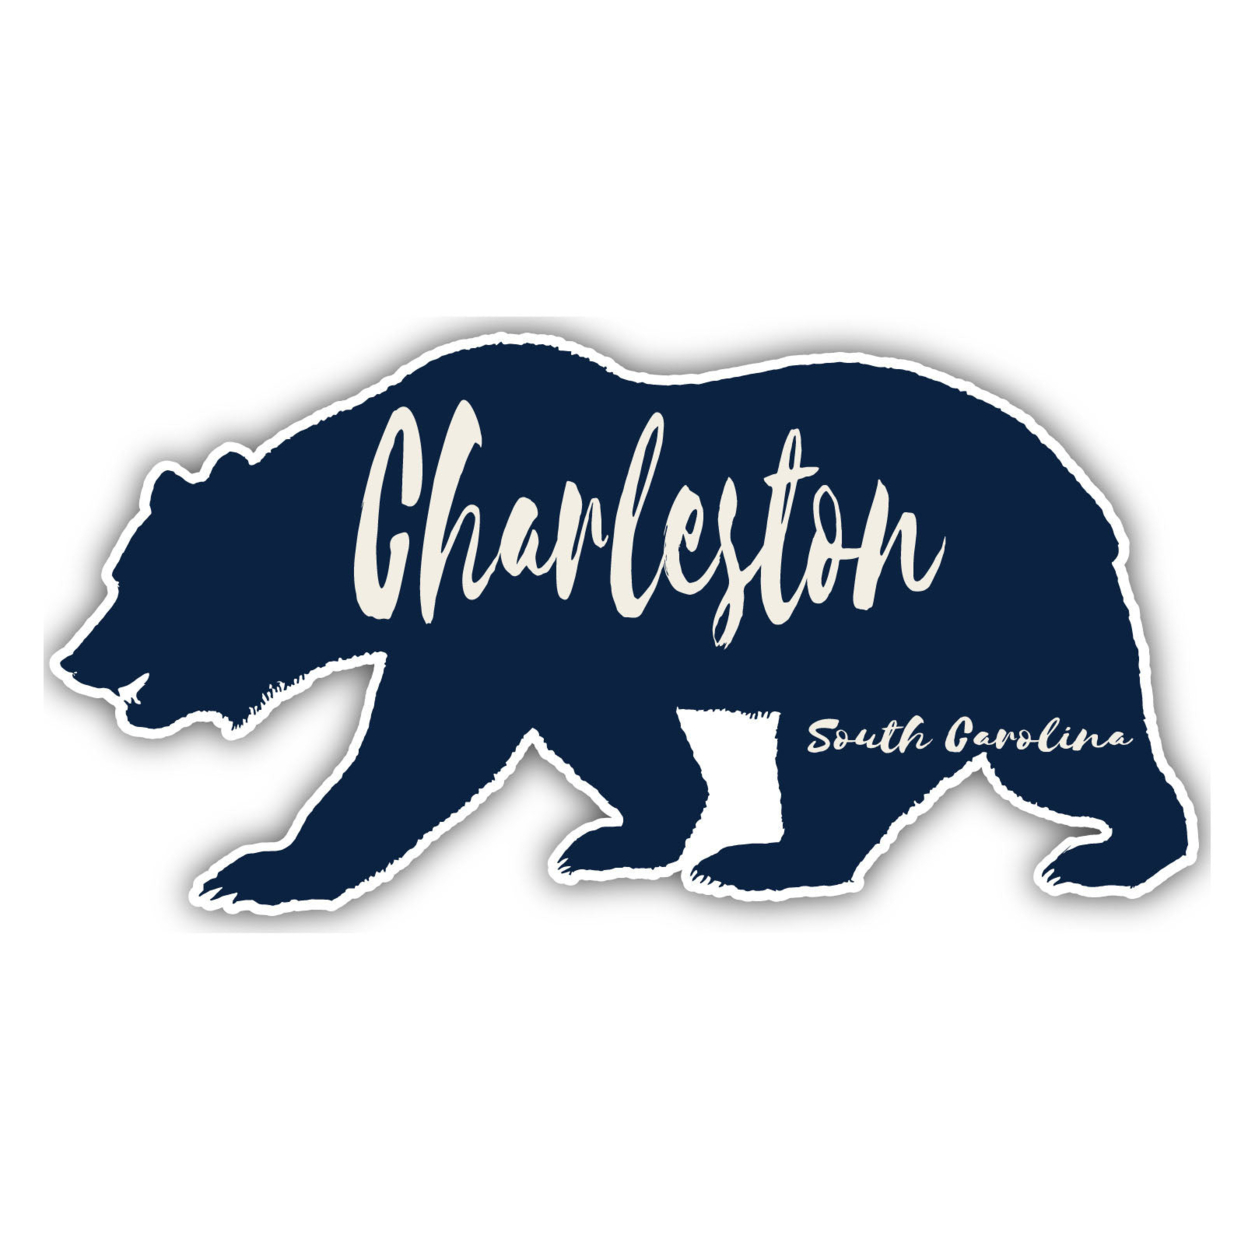 Charleston South Carolina Souvenir Decorative Stickers (Choose Theme And Size) - 4-Pack, 6-Inch, Tent